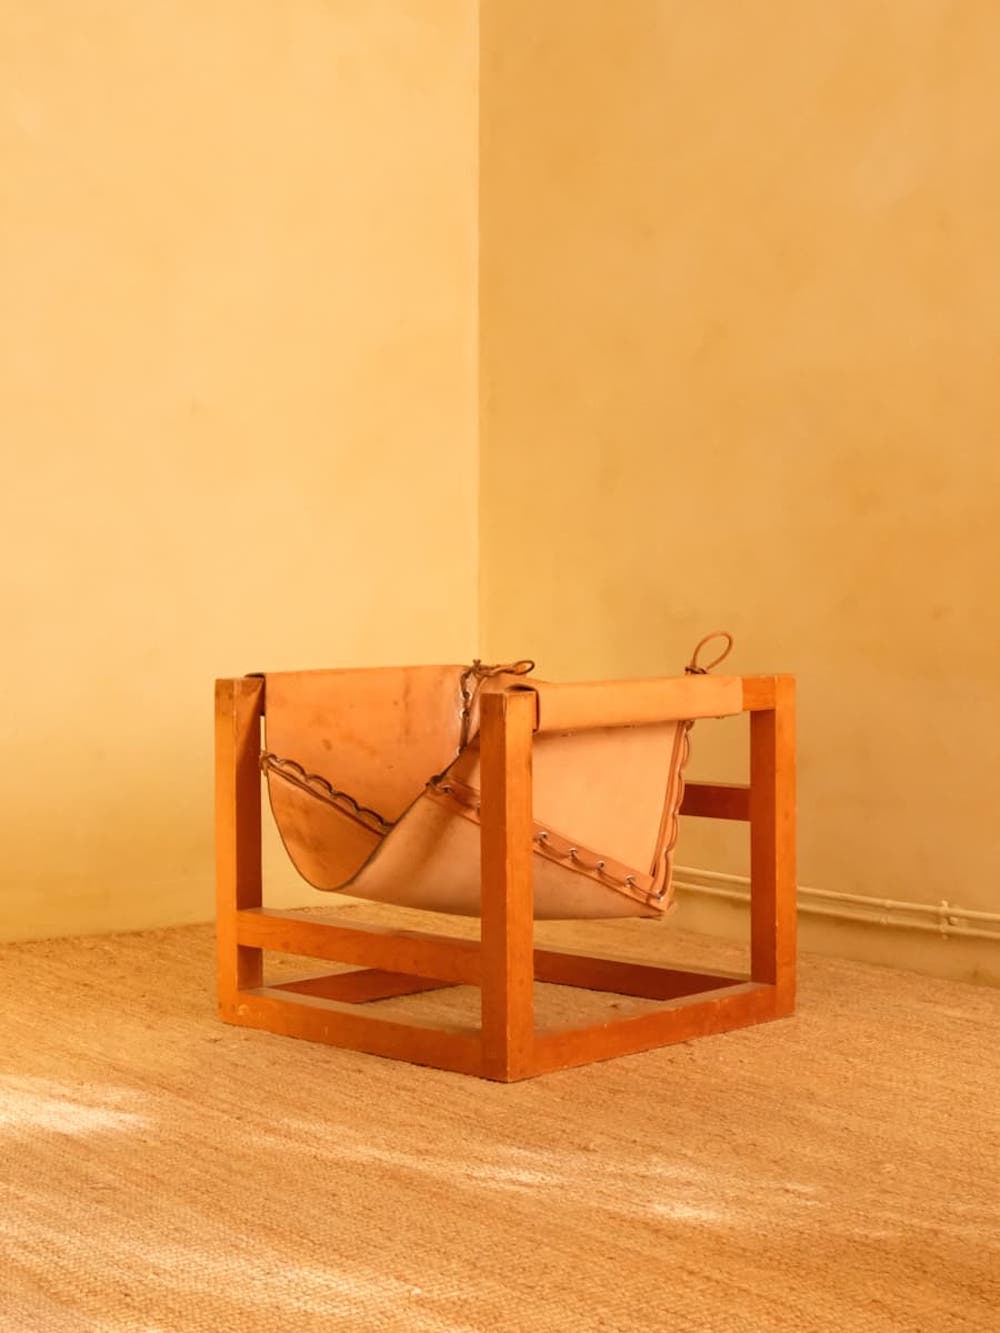 Lounge Chair Model Tail 4 with wood frame, metal pin joint, terracotta leather and leather straps, designed and crafted by the German designer Heinz Witthoeft in 1959 for Witthoeft, Stuttgart. 

The Lounge Chair Model Tail 4 is an iconic piece of